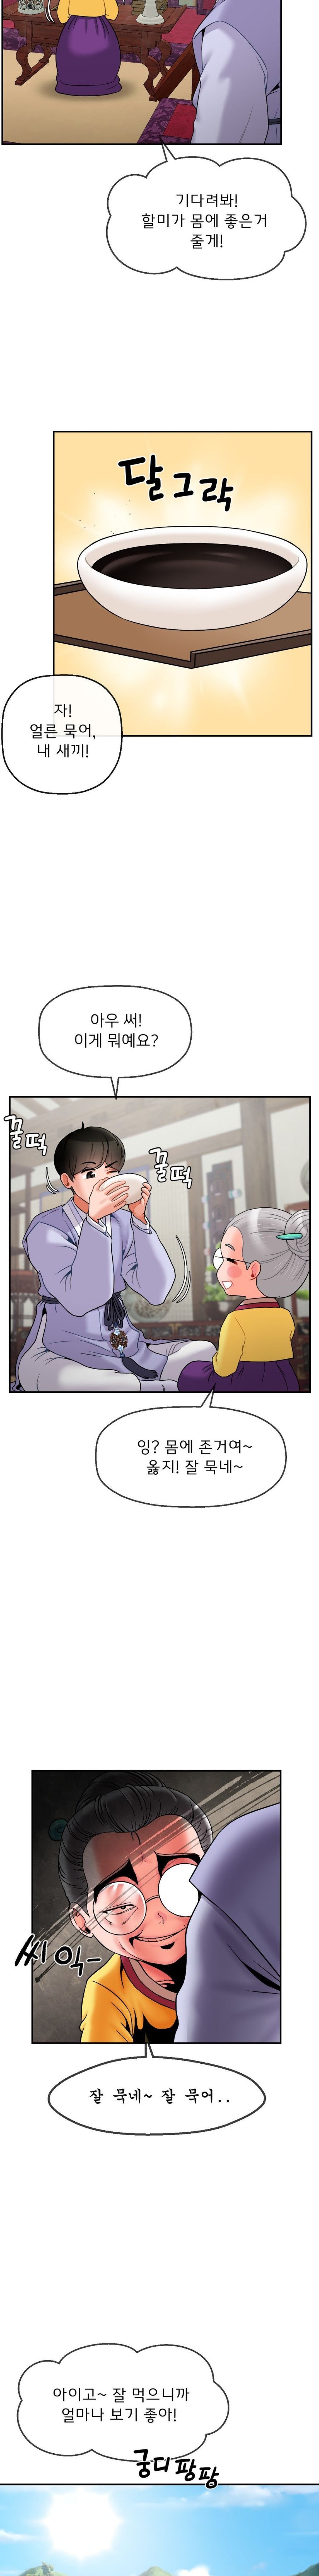 seventeenth-only-son-raw-chap-3-8